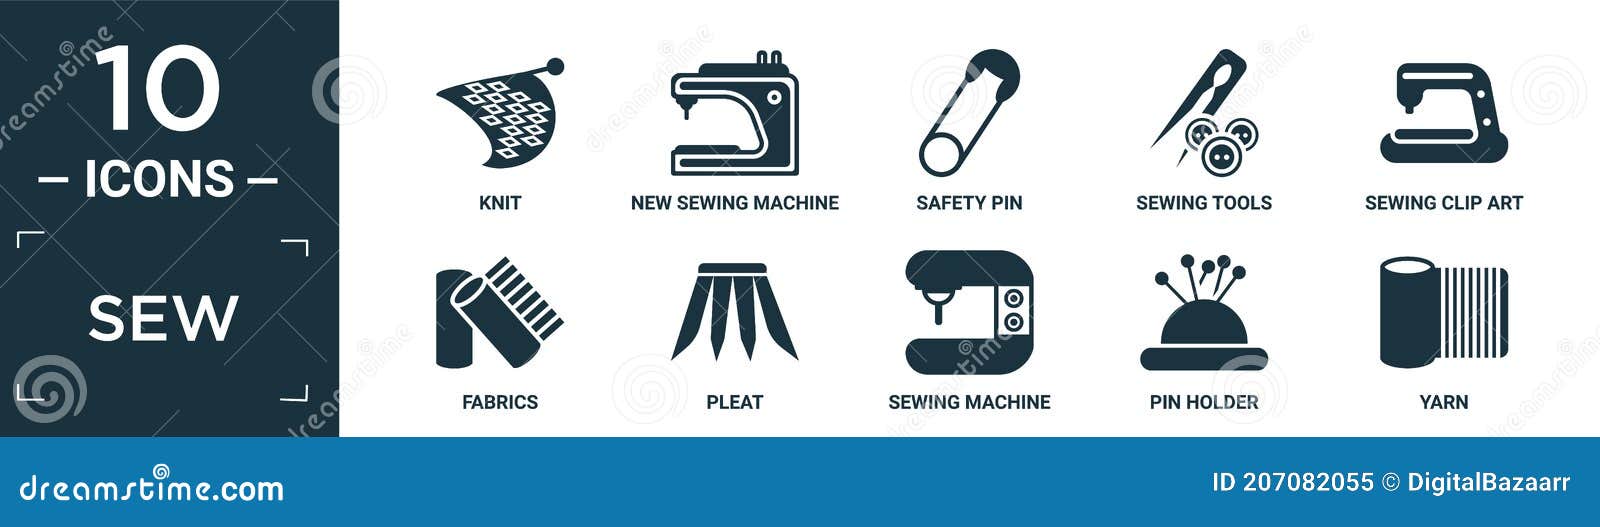 filled sew icon set. contain flat knit, new sewing machine, safety pin, sewing tools, sewing clip art, fabrics, pleat, machine,